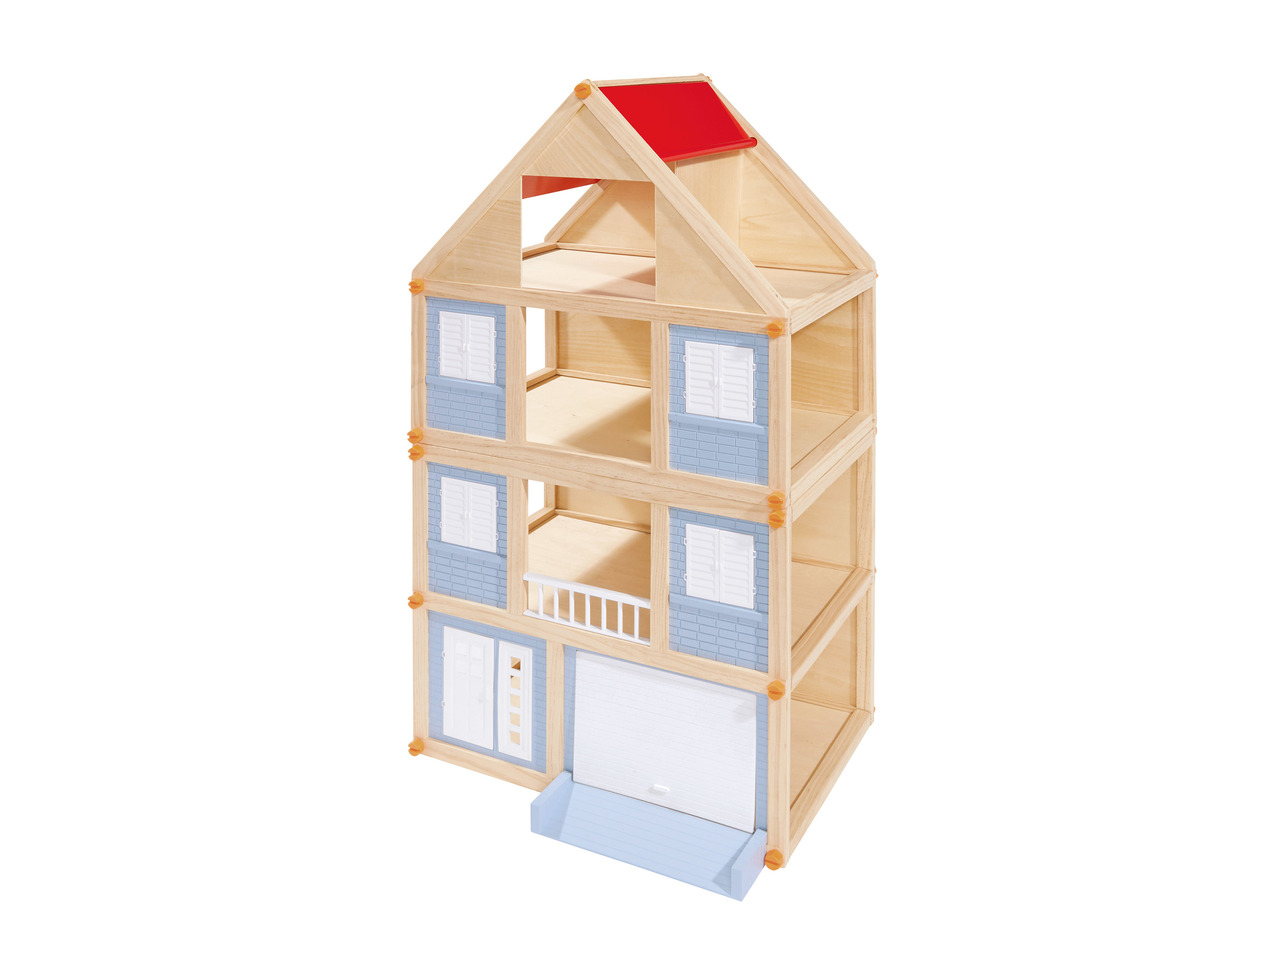 Playtive Junior Wooden Doll's House1